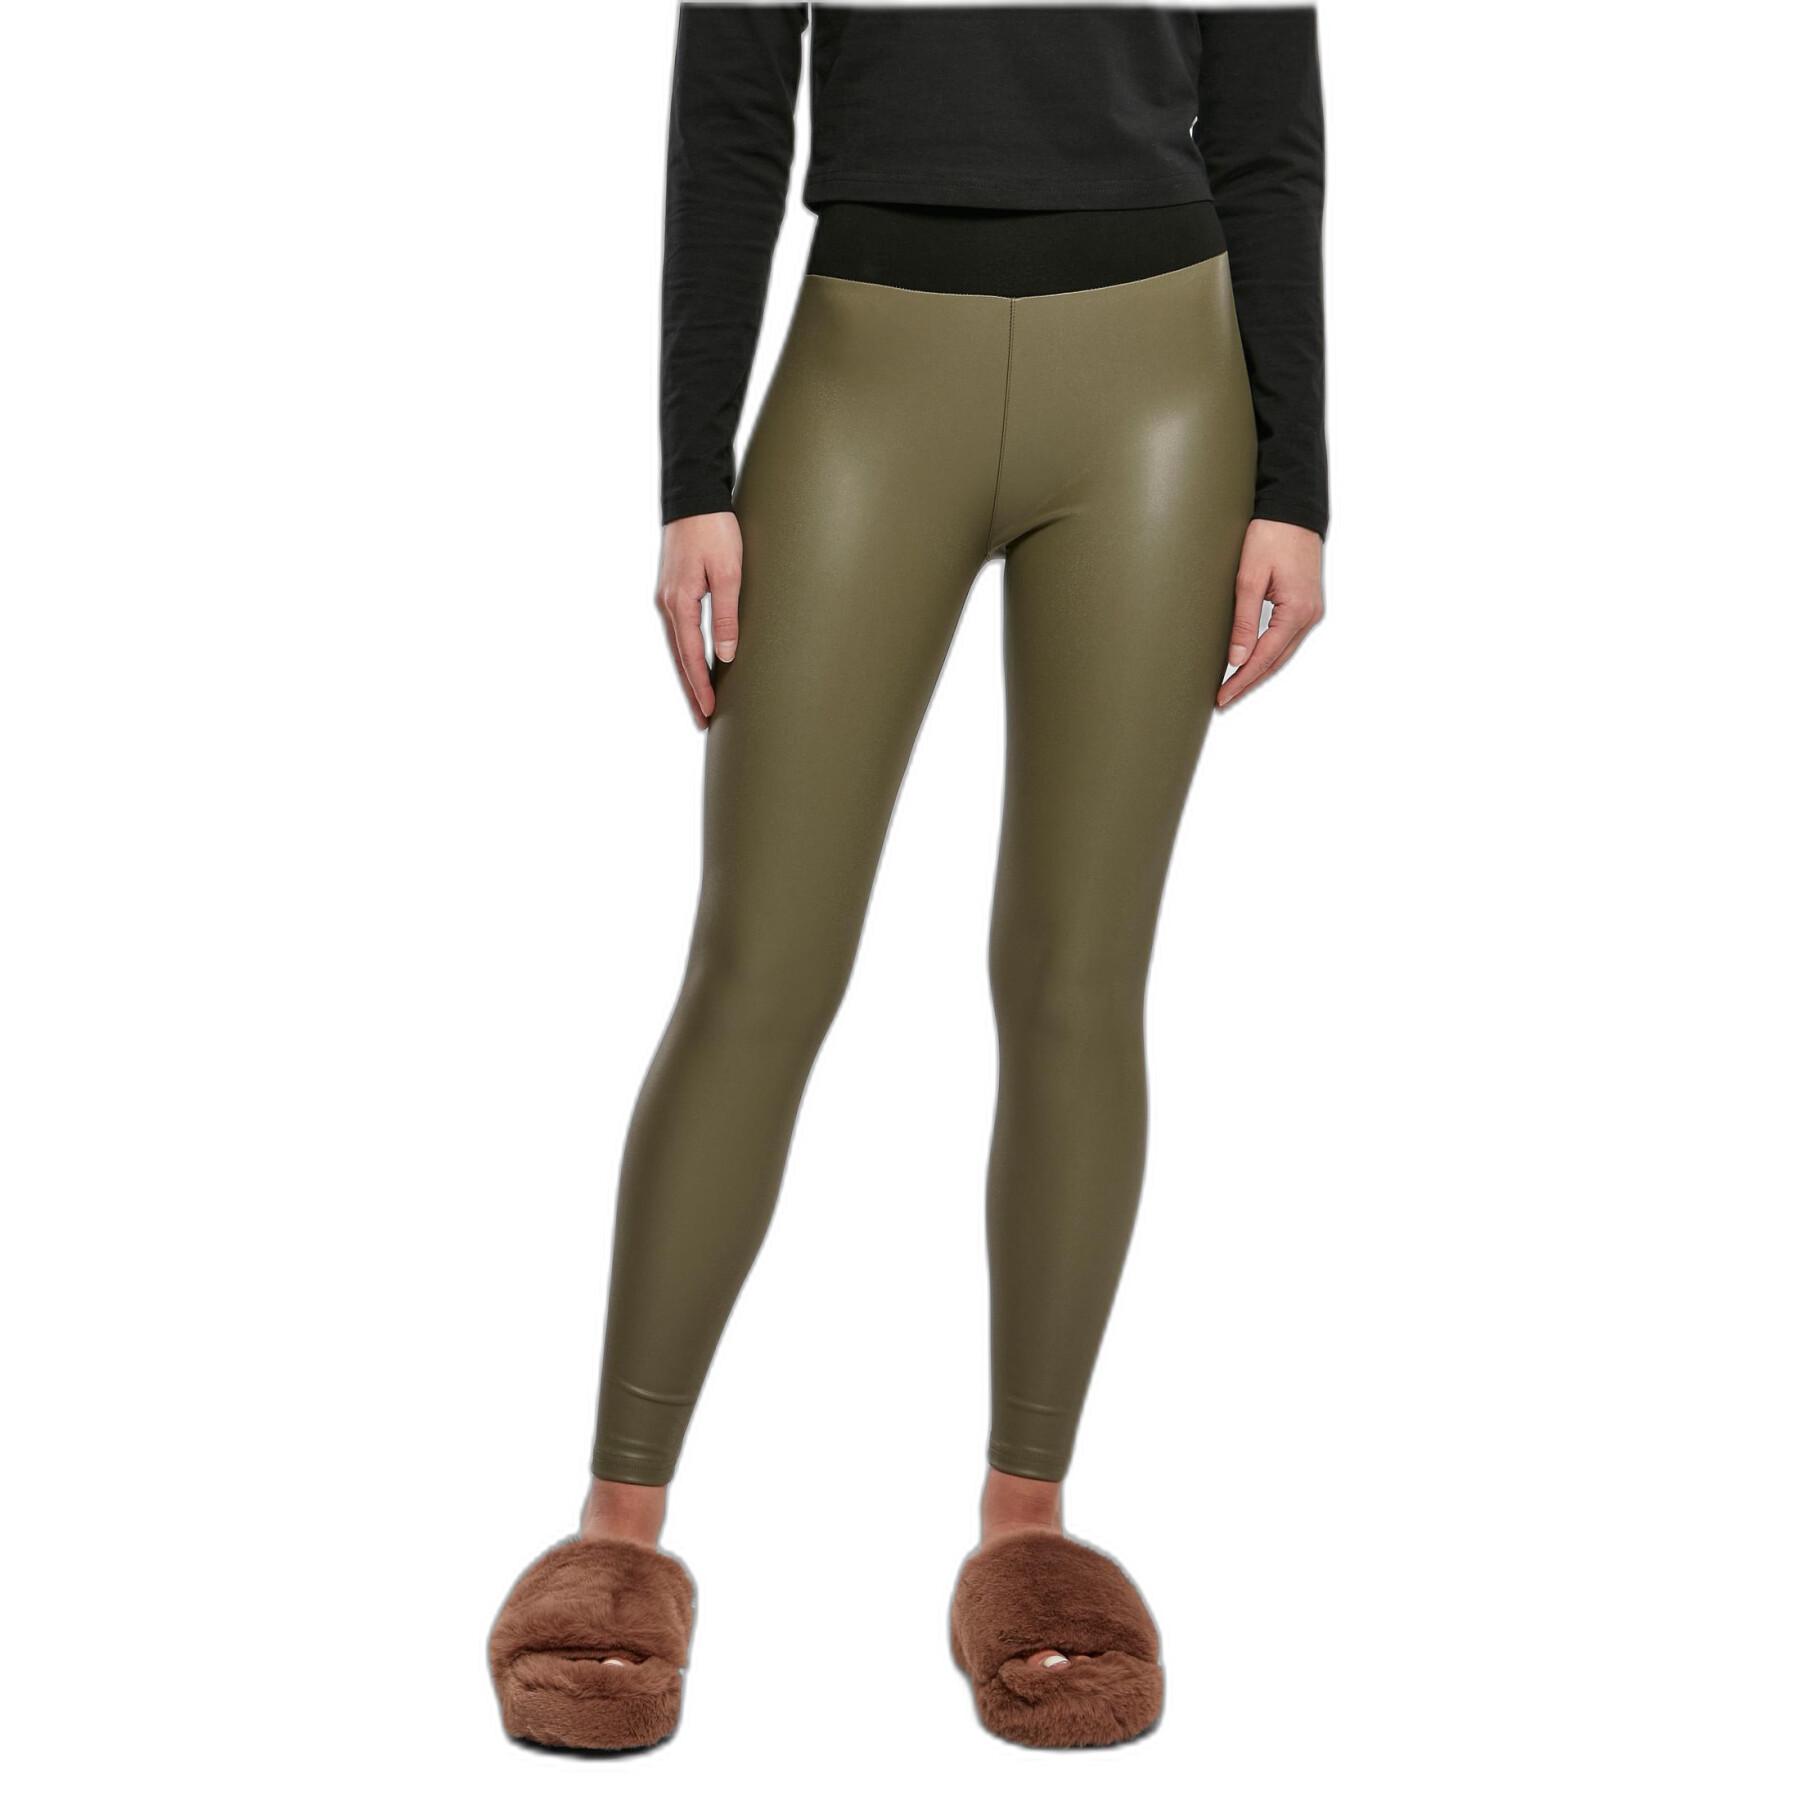 Women's high-waisted faux leather leggings Urban Classics GT